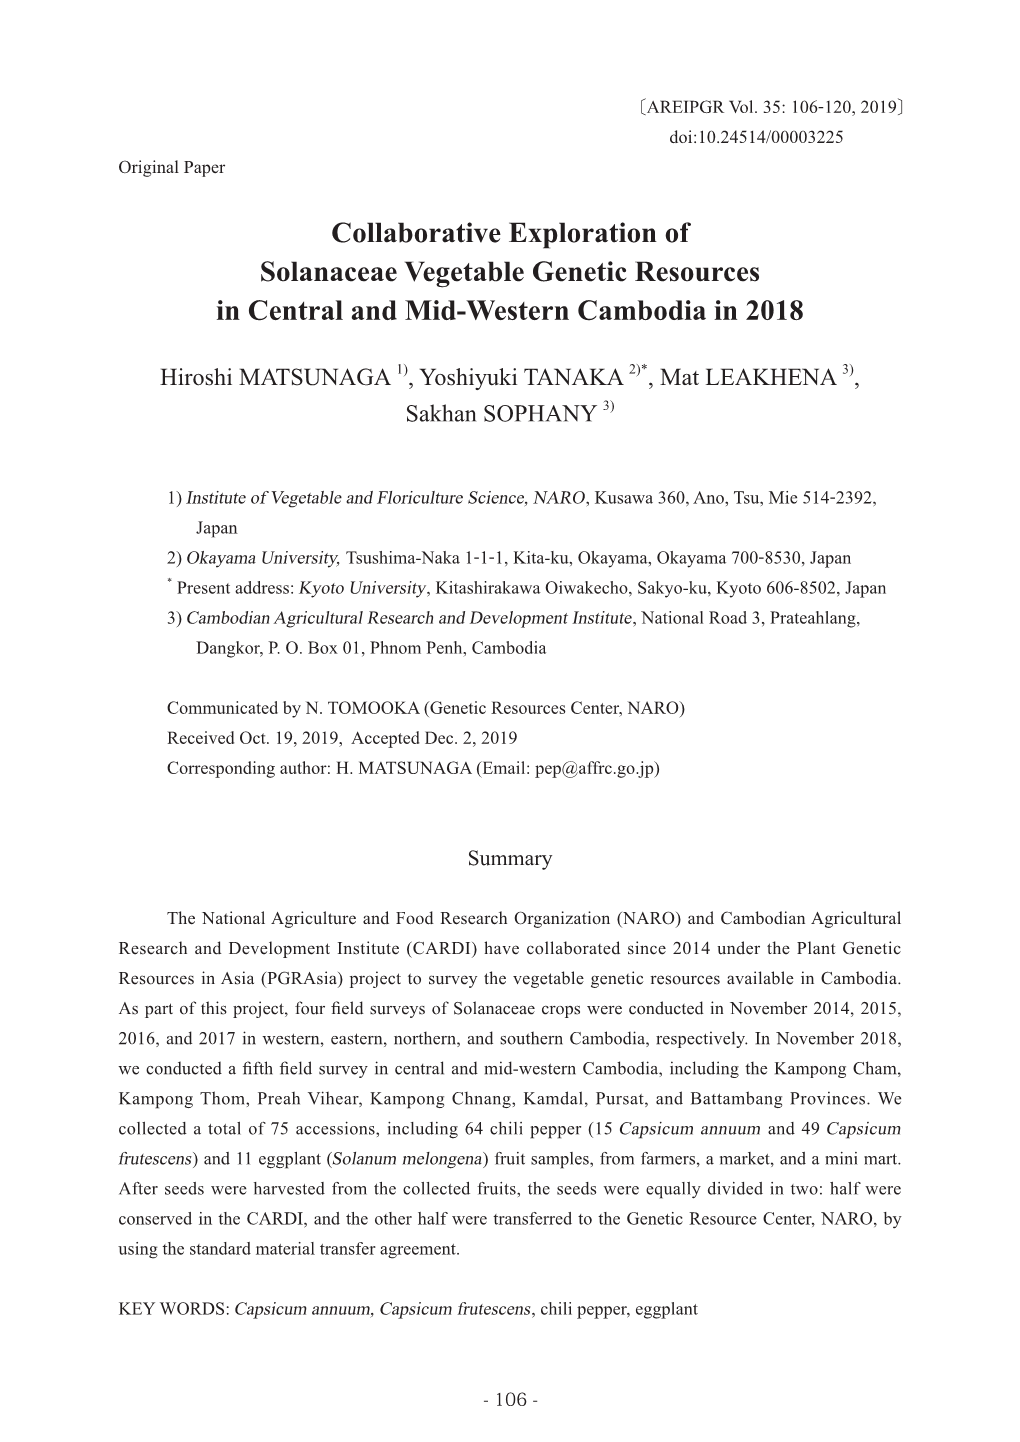 Collaborative Exploration of Solanaceae Vegetable Genetic Resources in Central and Mid-Western Cambodia in 2018